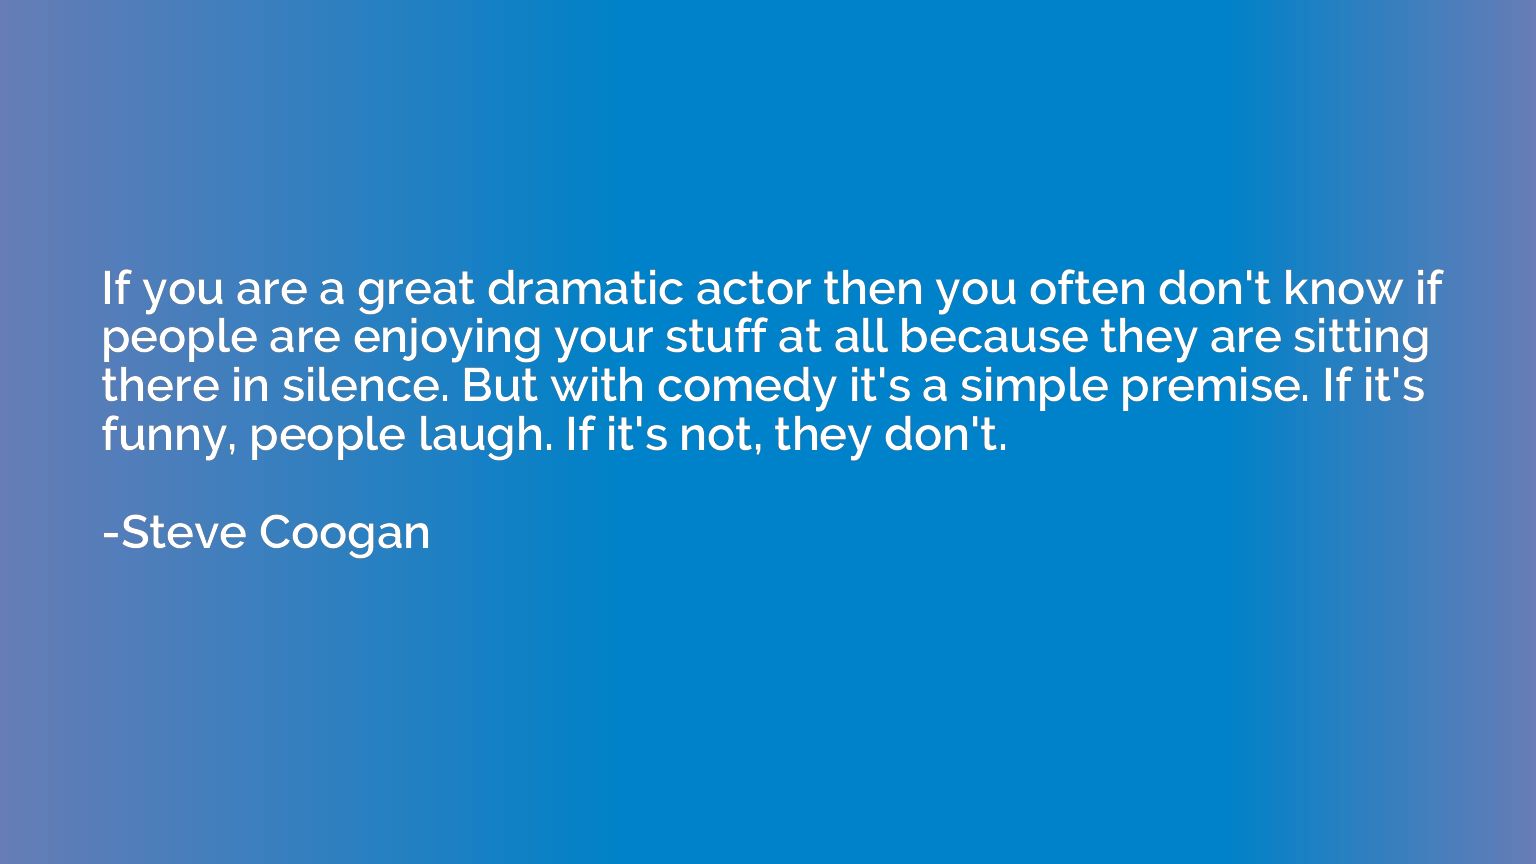 If you are a great dramatic actor then you often don't know 